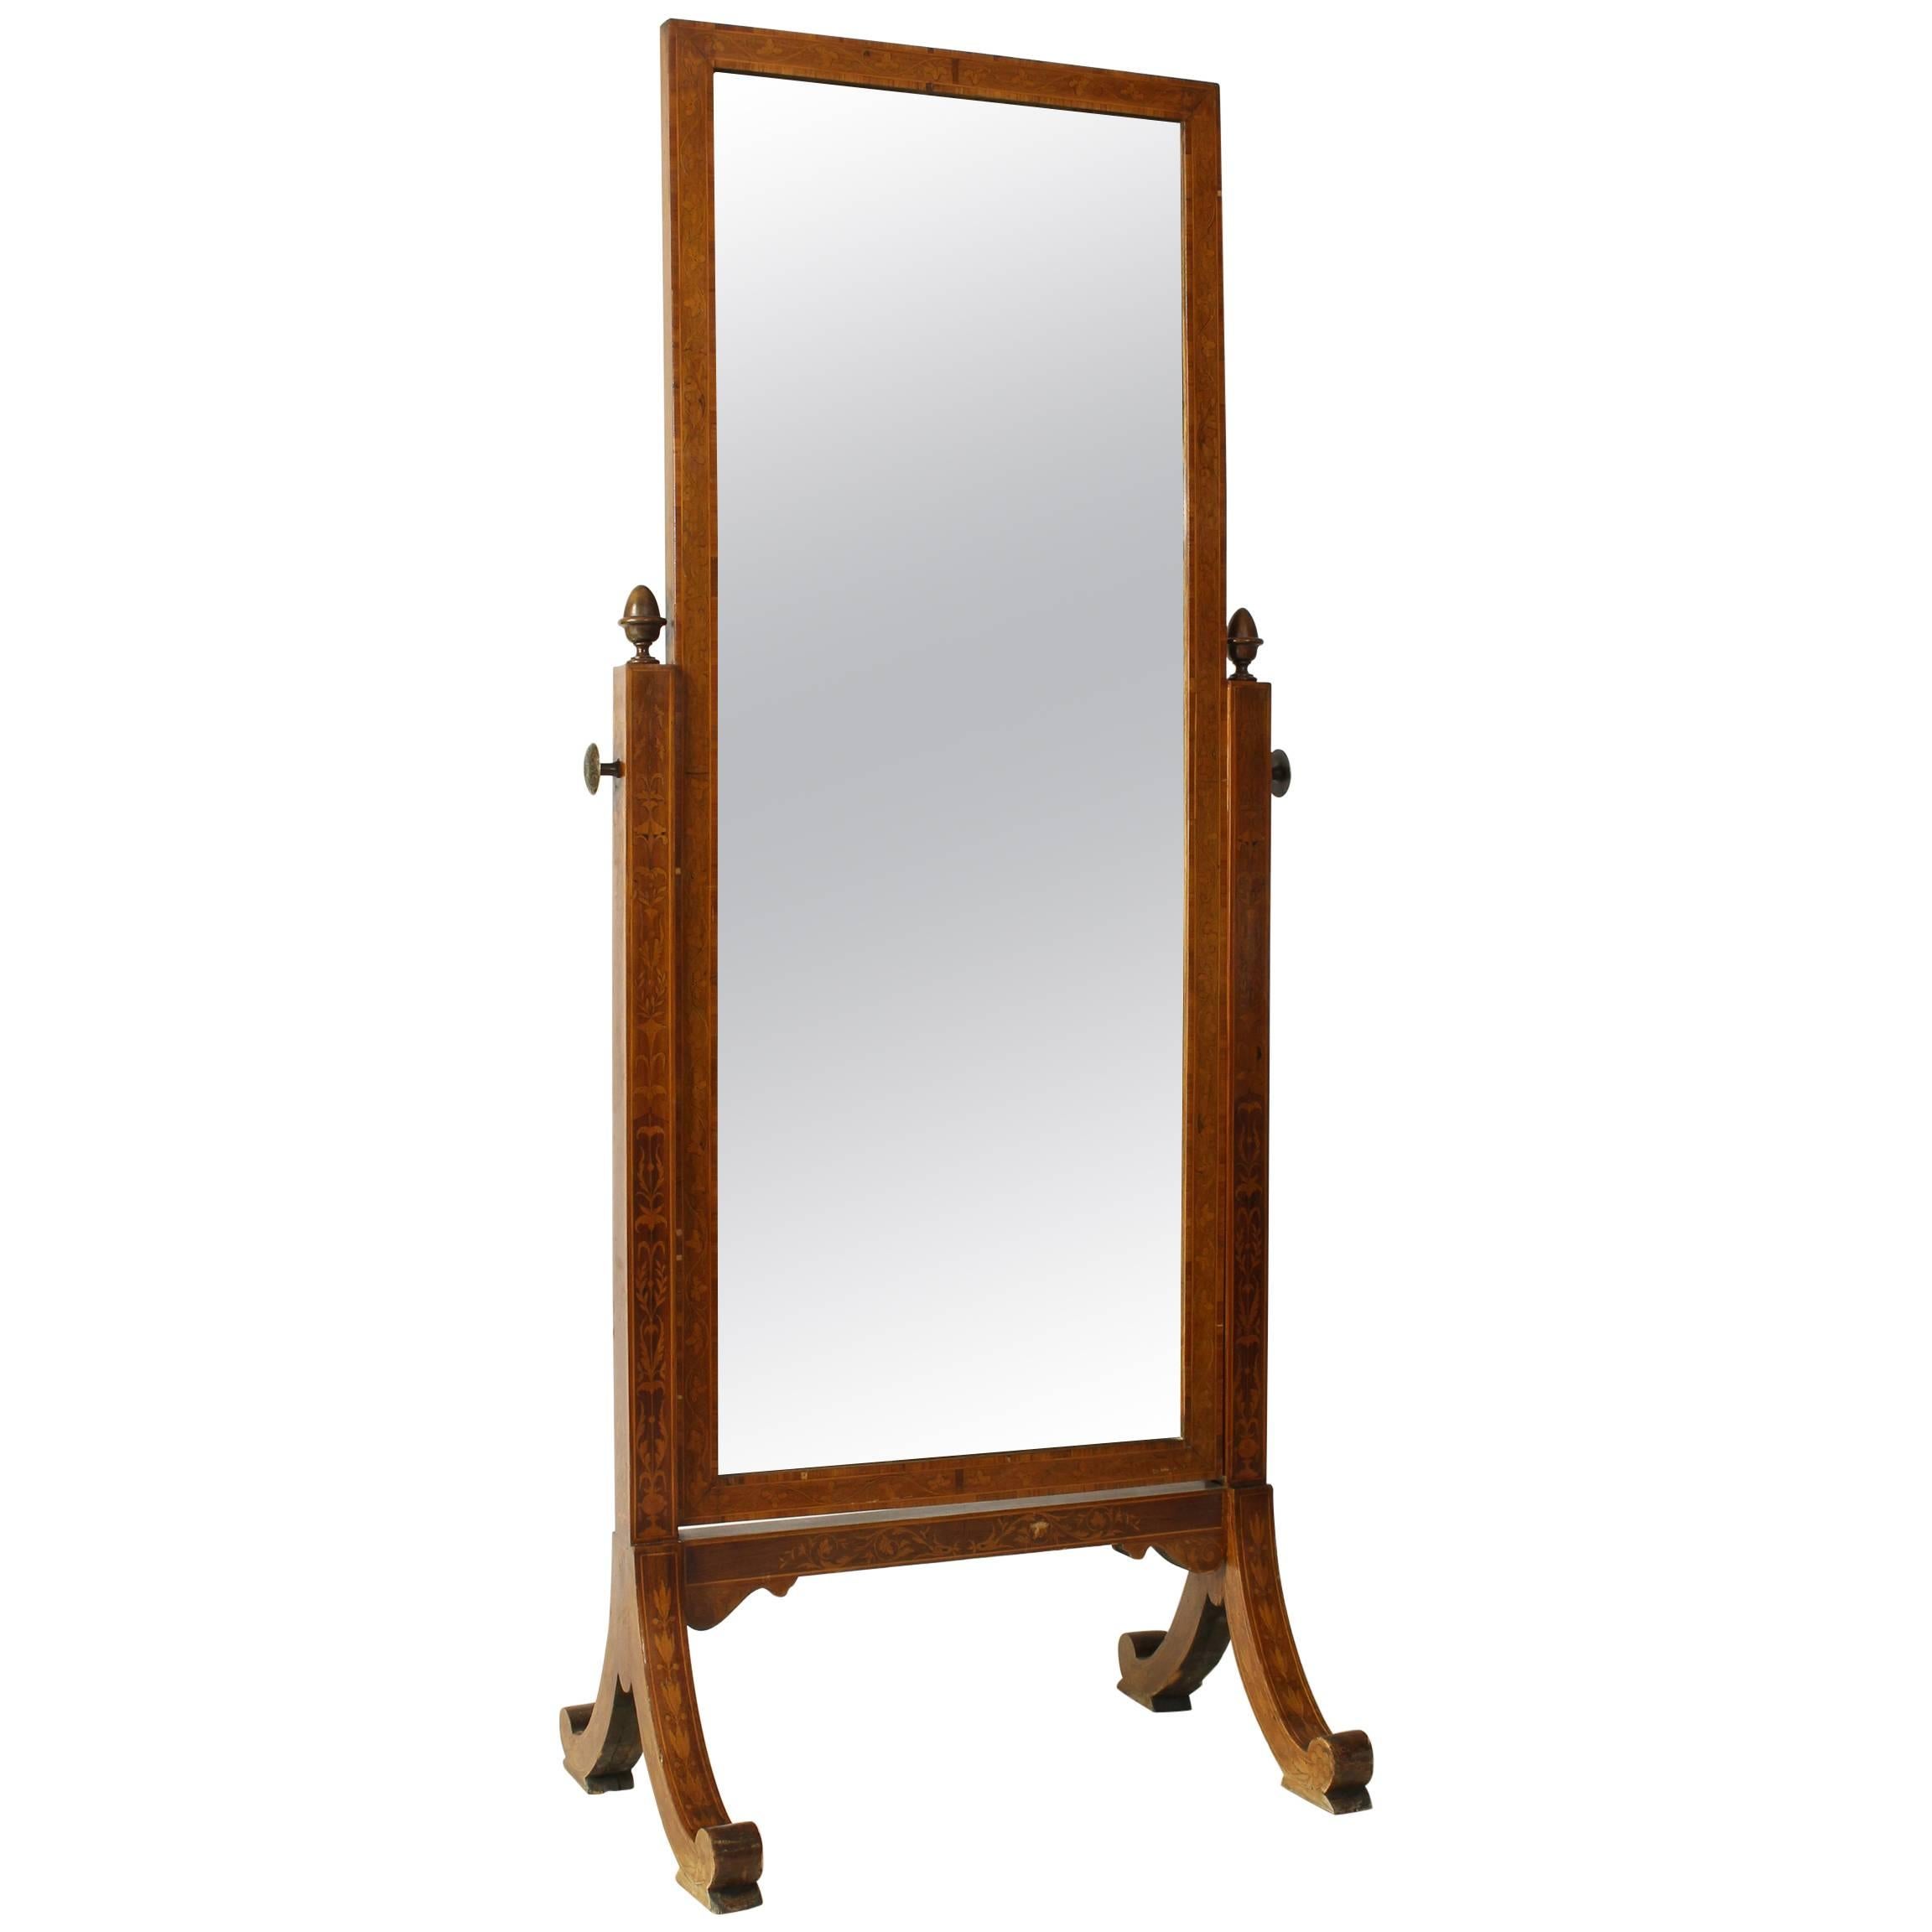 19th Century Continental Fruitwood Cheval Mirror